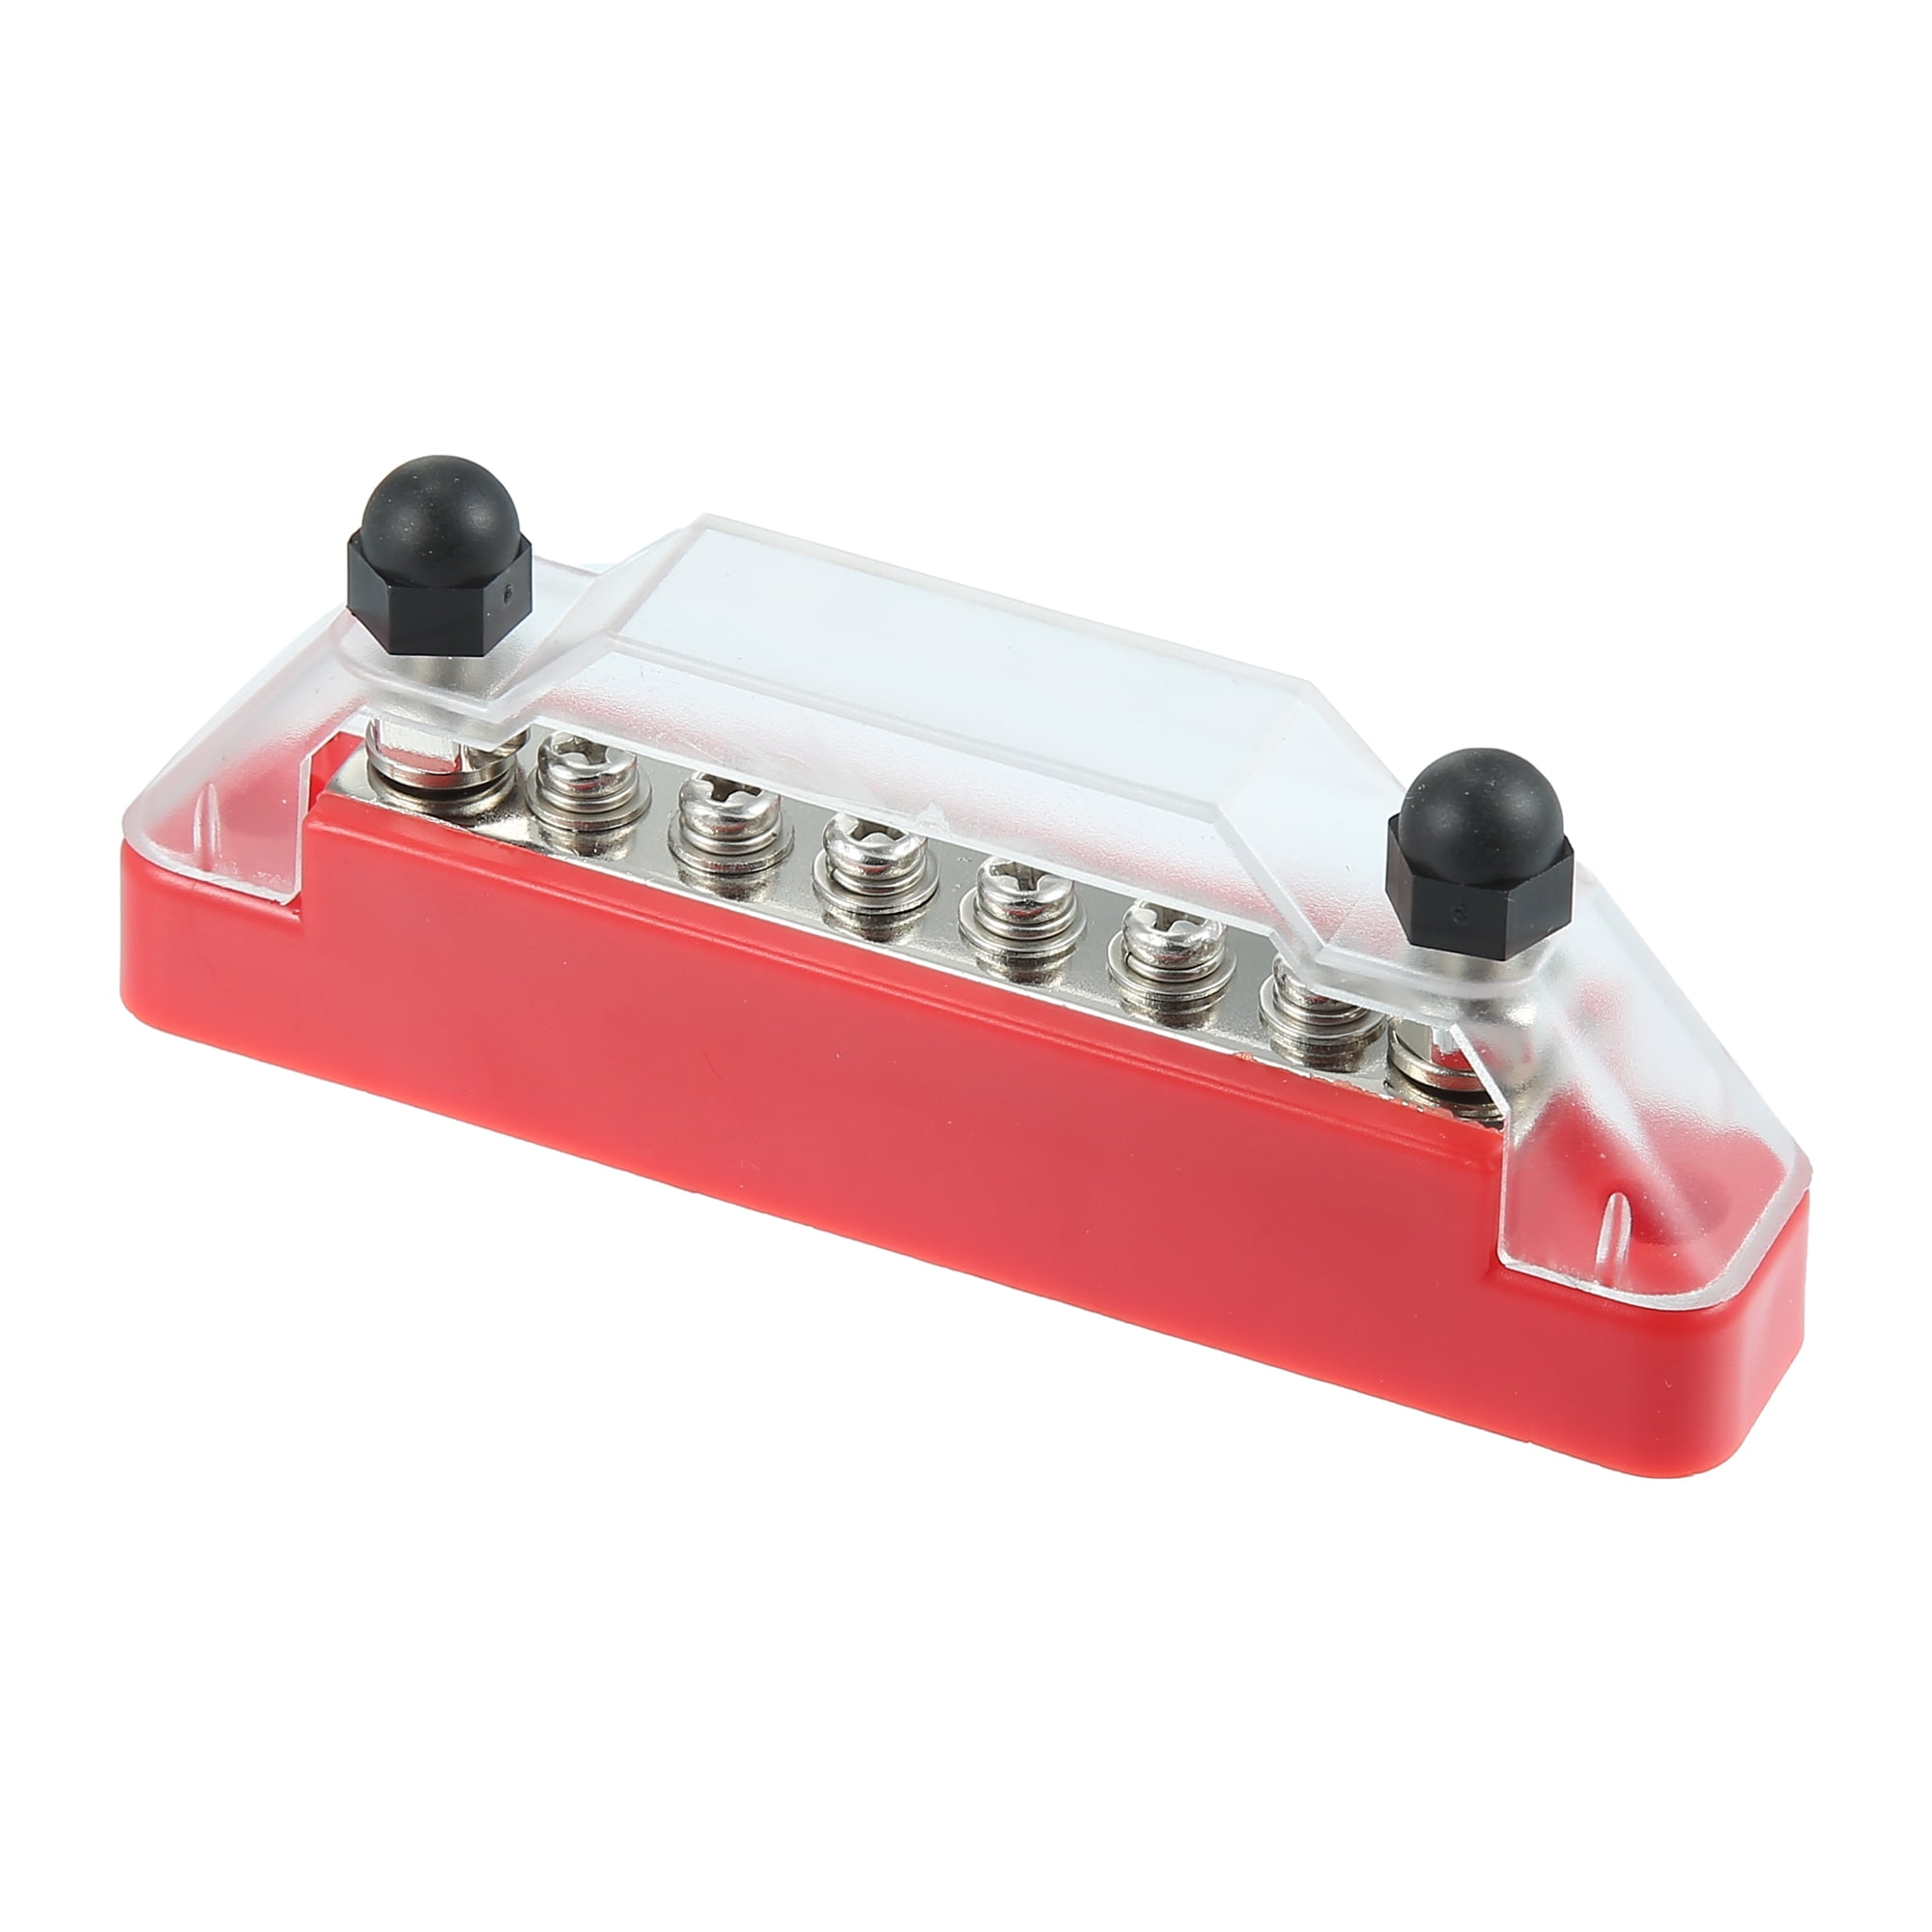 Heavy Duty Bus Bar Box M8 300A with 4 Terminal Studs Power Distribution Box  Block Boating Fishing Battery Switches Busbars 12v-24v Max 48V (Red)